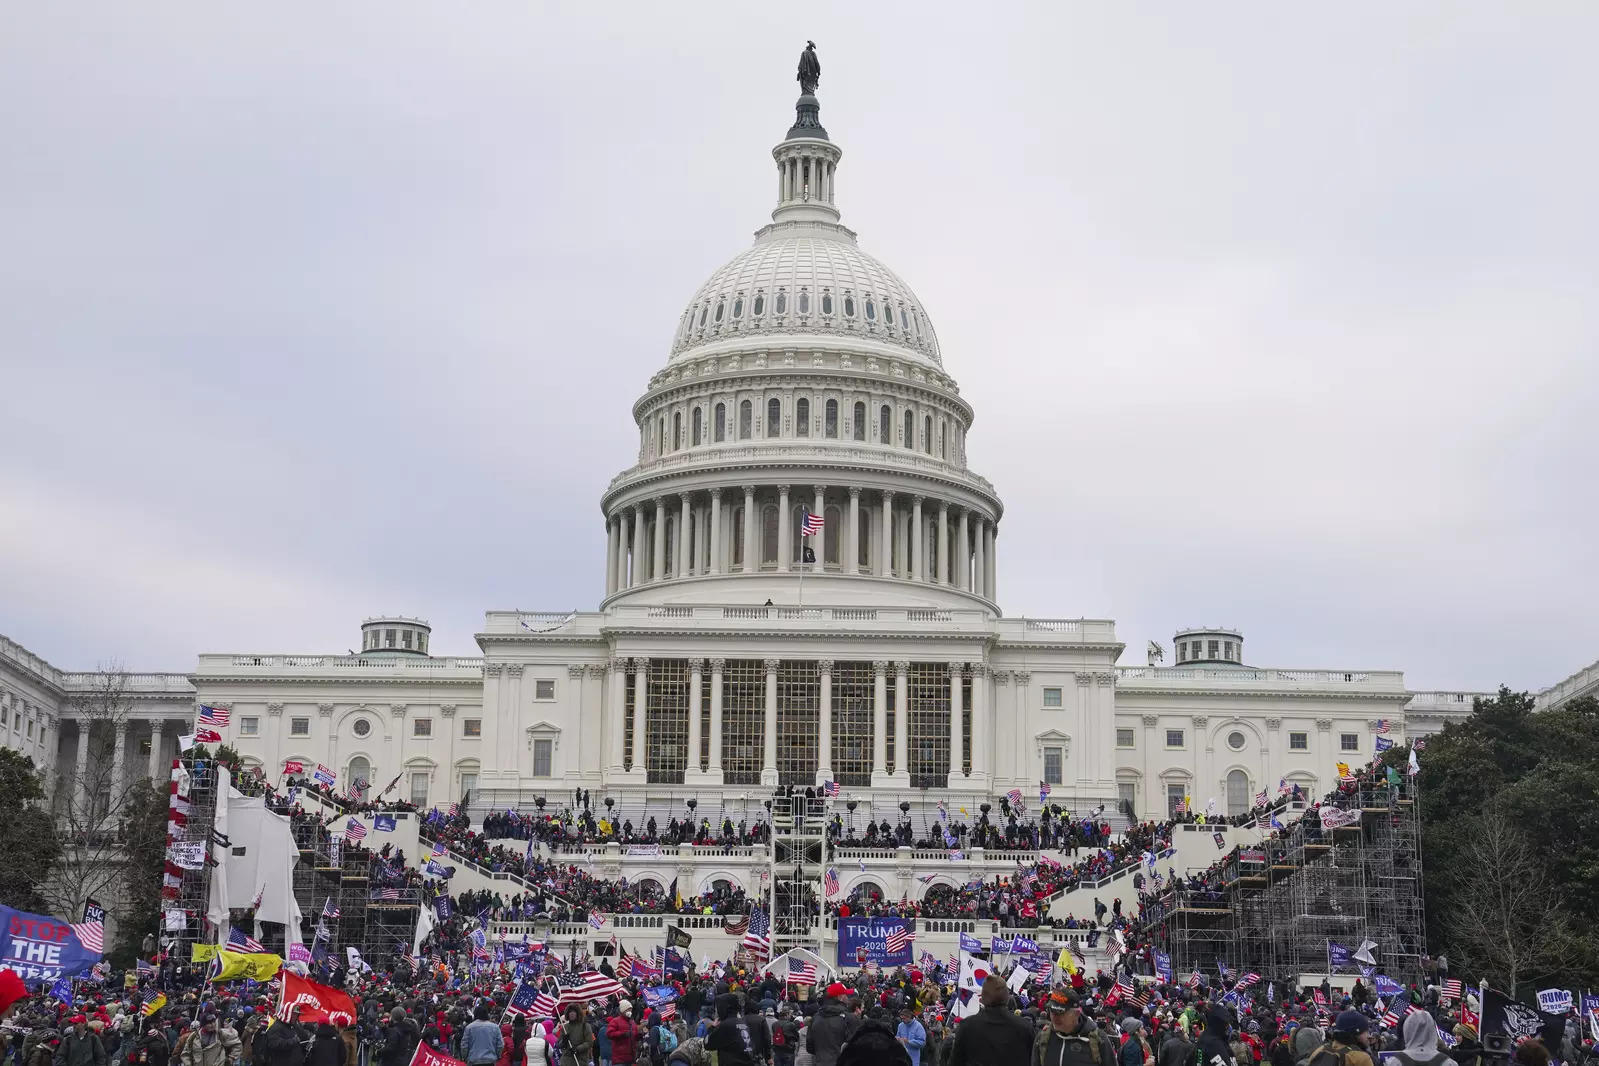 Former president Donald Trump loyalists rally at the US Capitol in Washington on January 6, 2021. (File photo: AP)